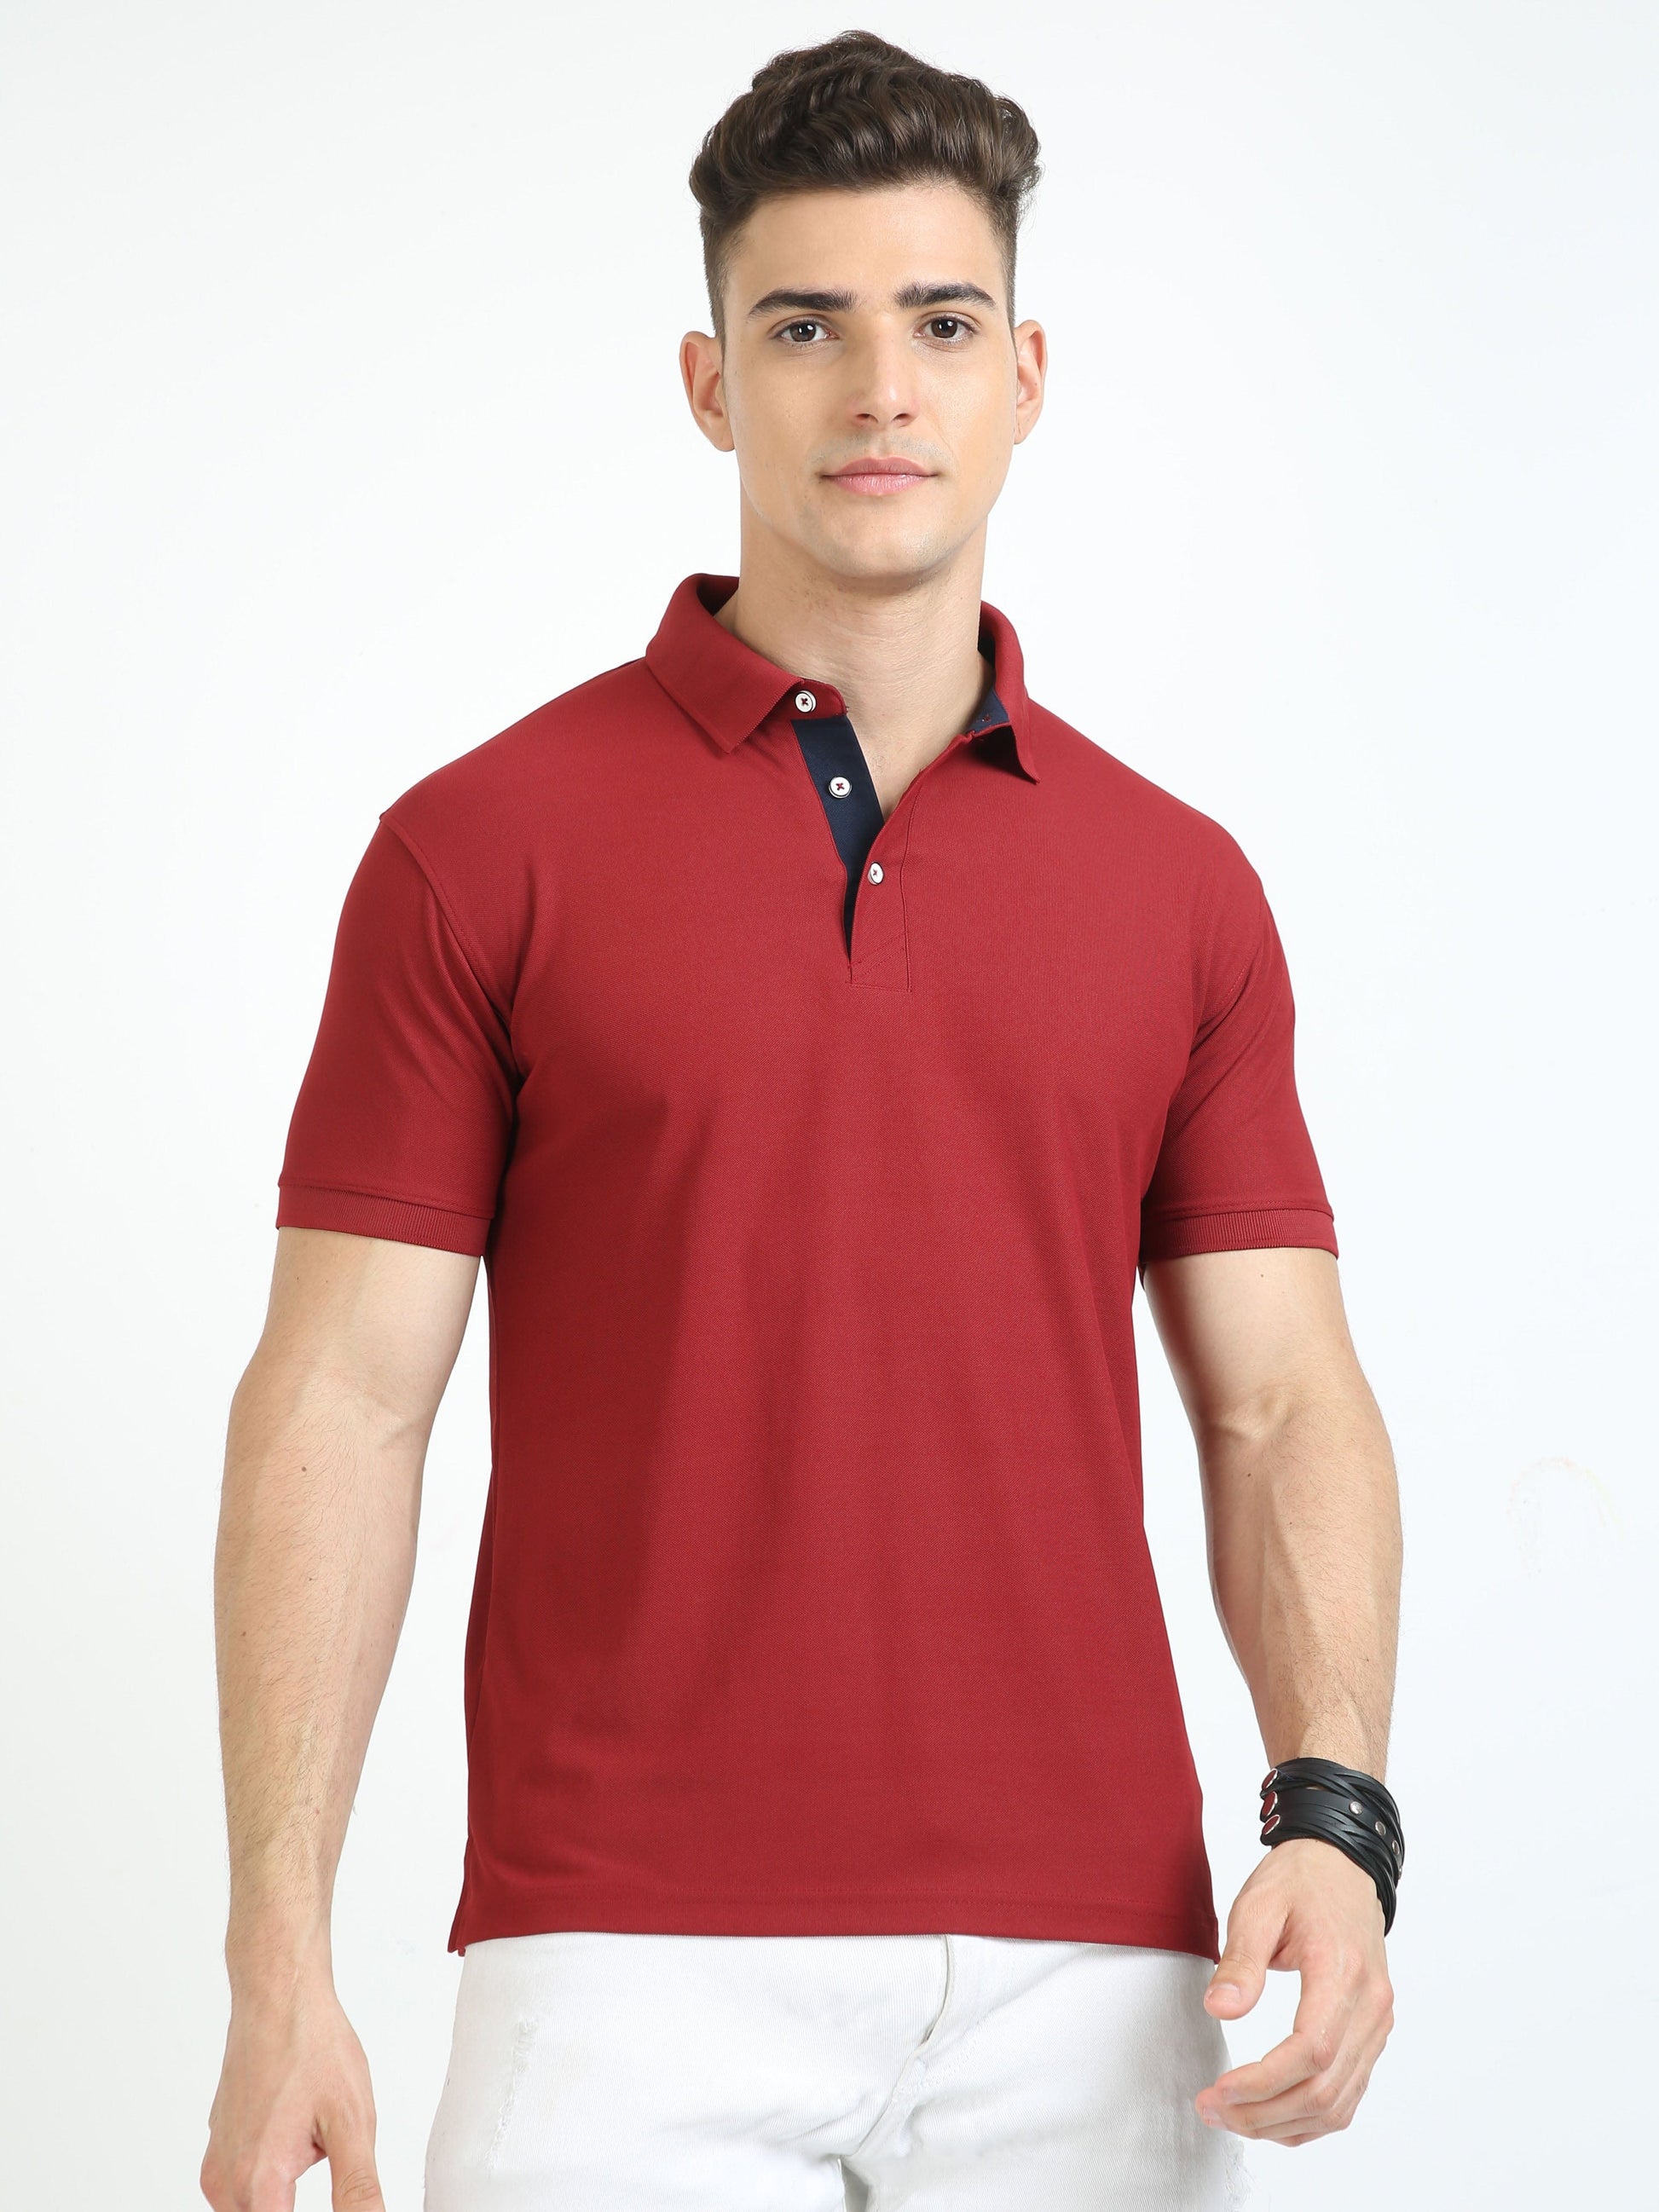 French Wine Men's Polo T-shirt